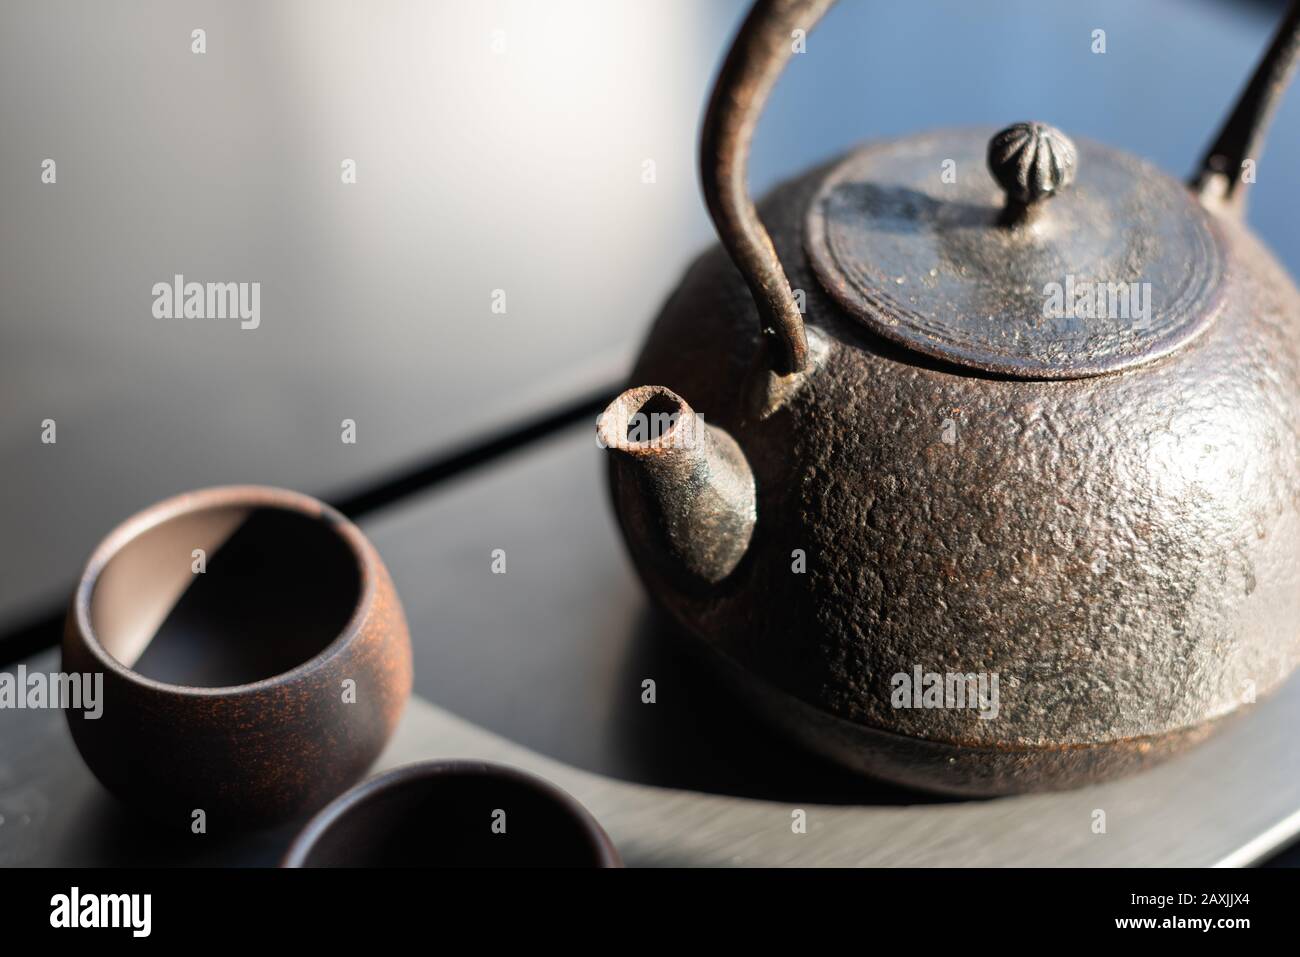 Traditional Chinese tea Set up with iron teapot Stock Photo